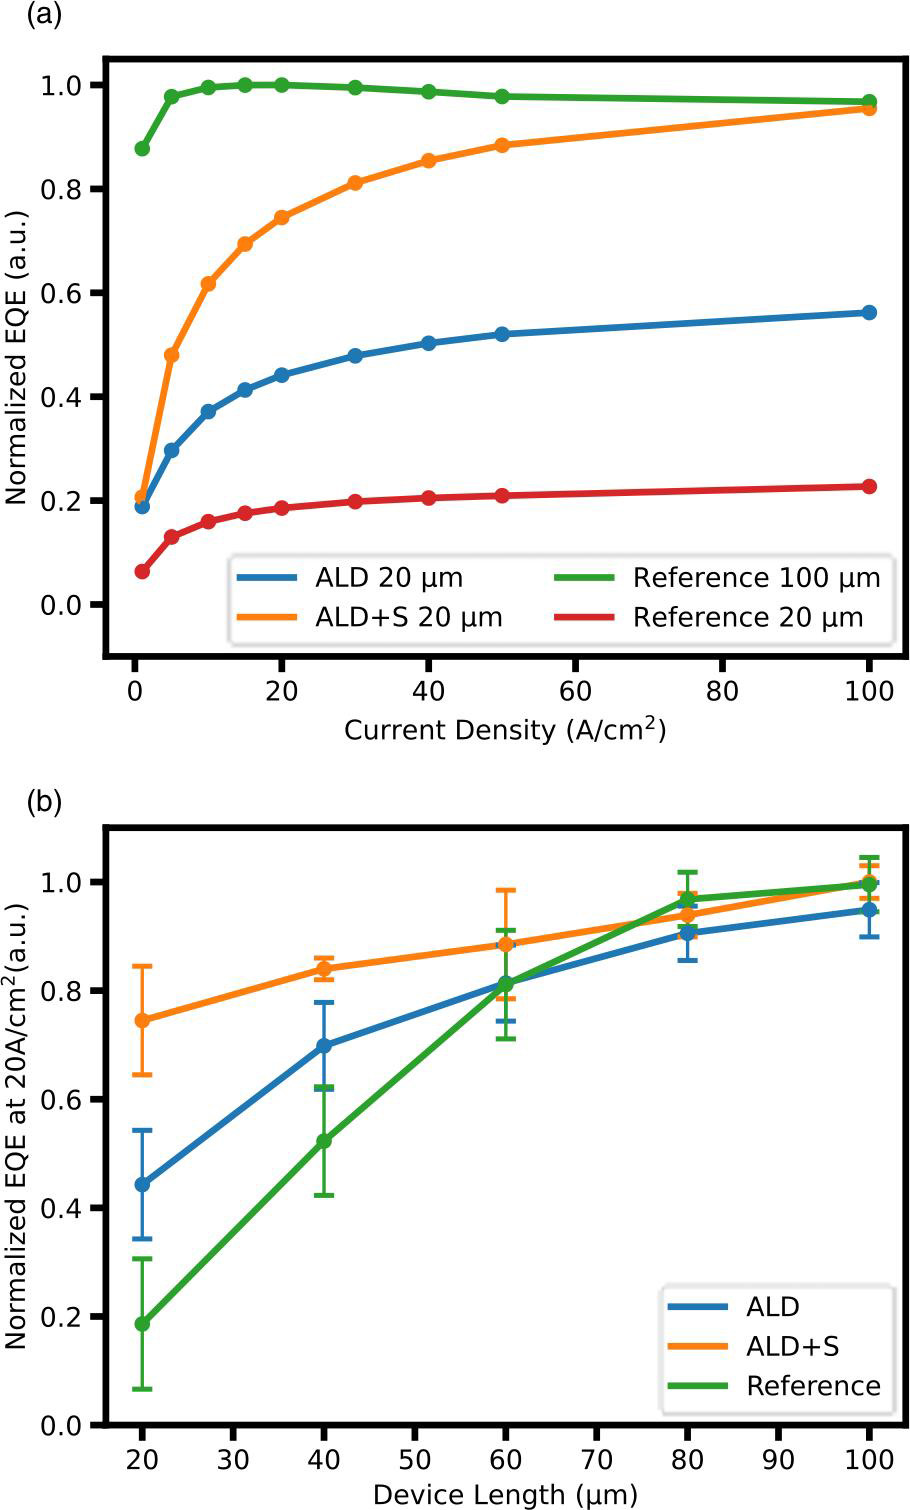 Figure 2: (a) On-wafer EQE performance of AlGaInP LEDs and (b) on-wafer EQE measurements of AlGaInP devices with and without thermal annealing before treating with ammonium sulfide with various side mesas.